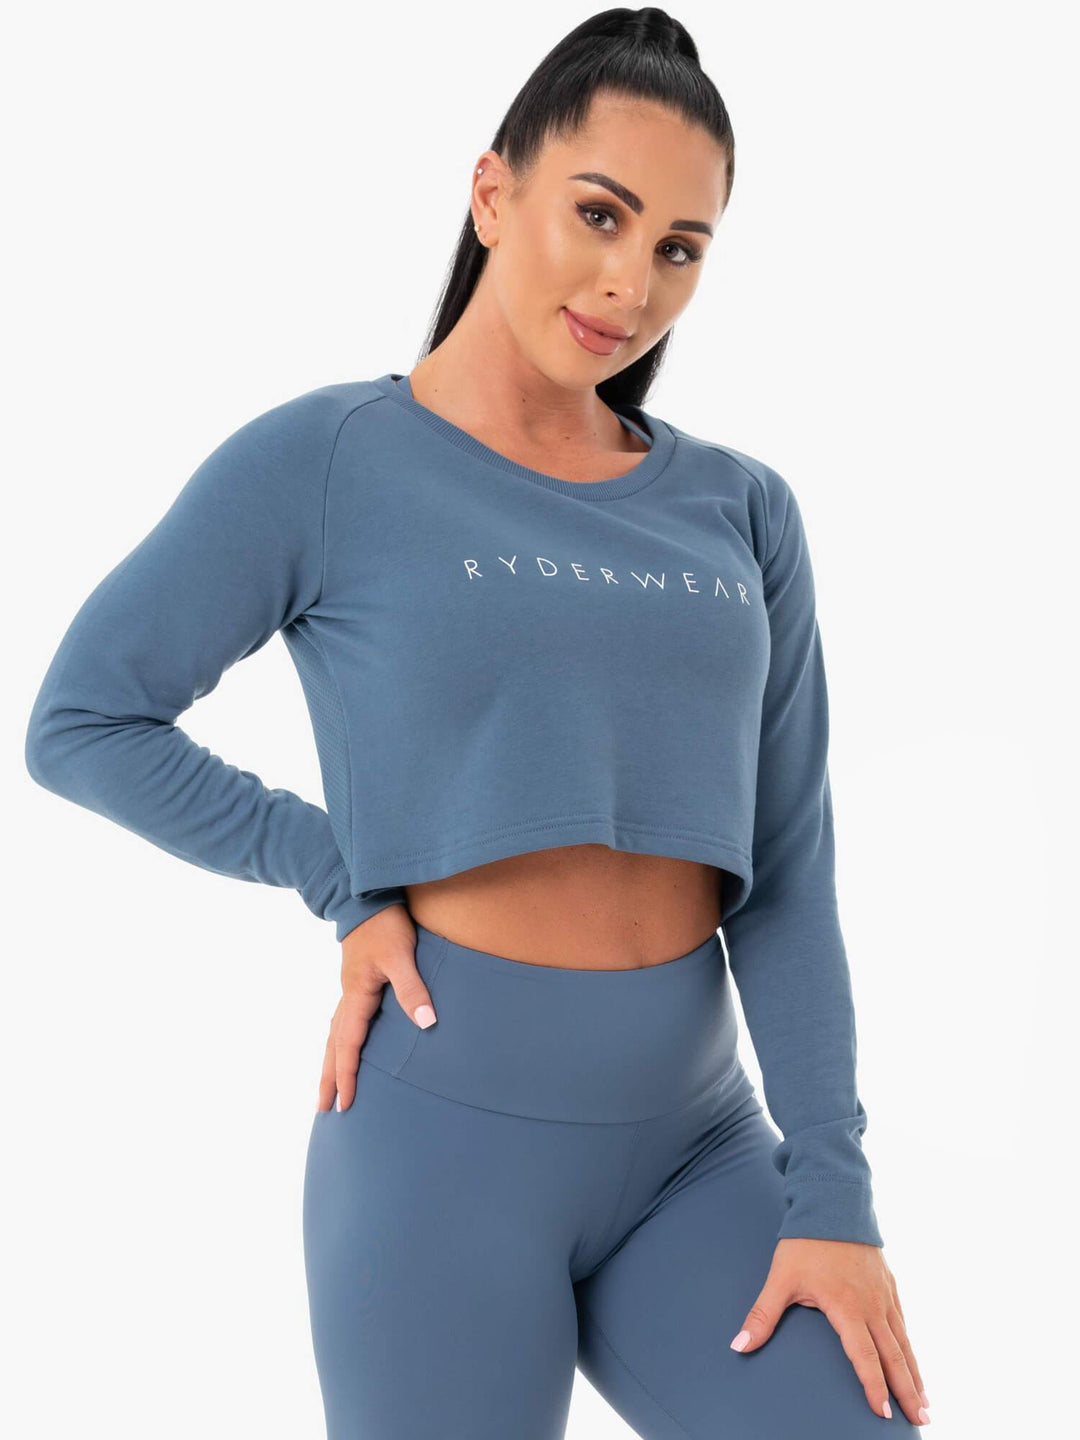 Staples Cropped Sweater - Steel Blue Clothing Ryderwear 